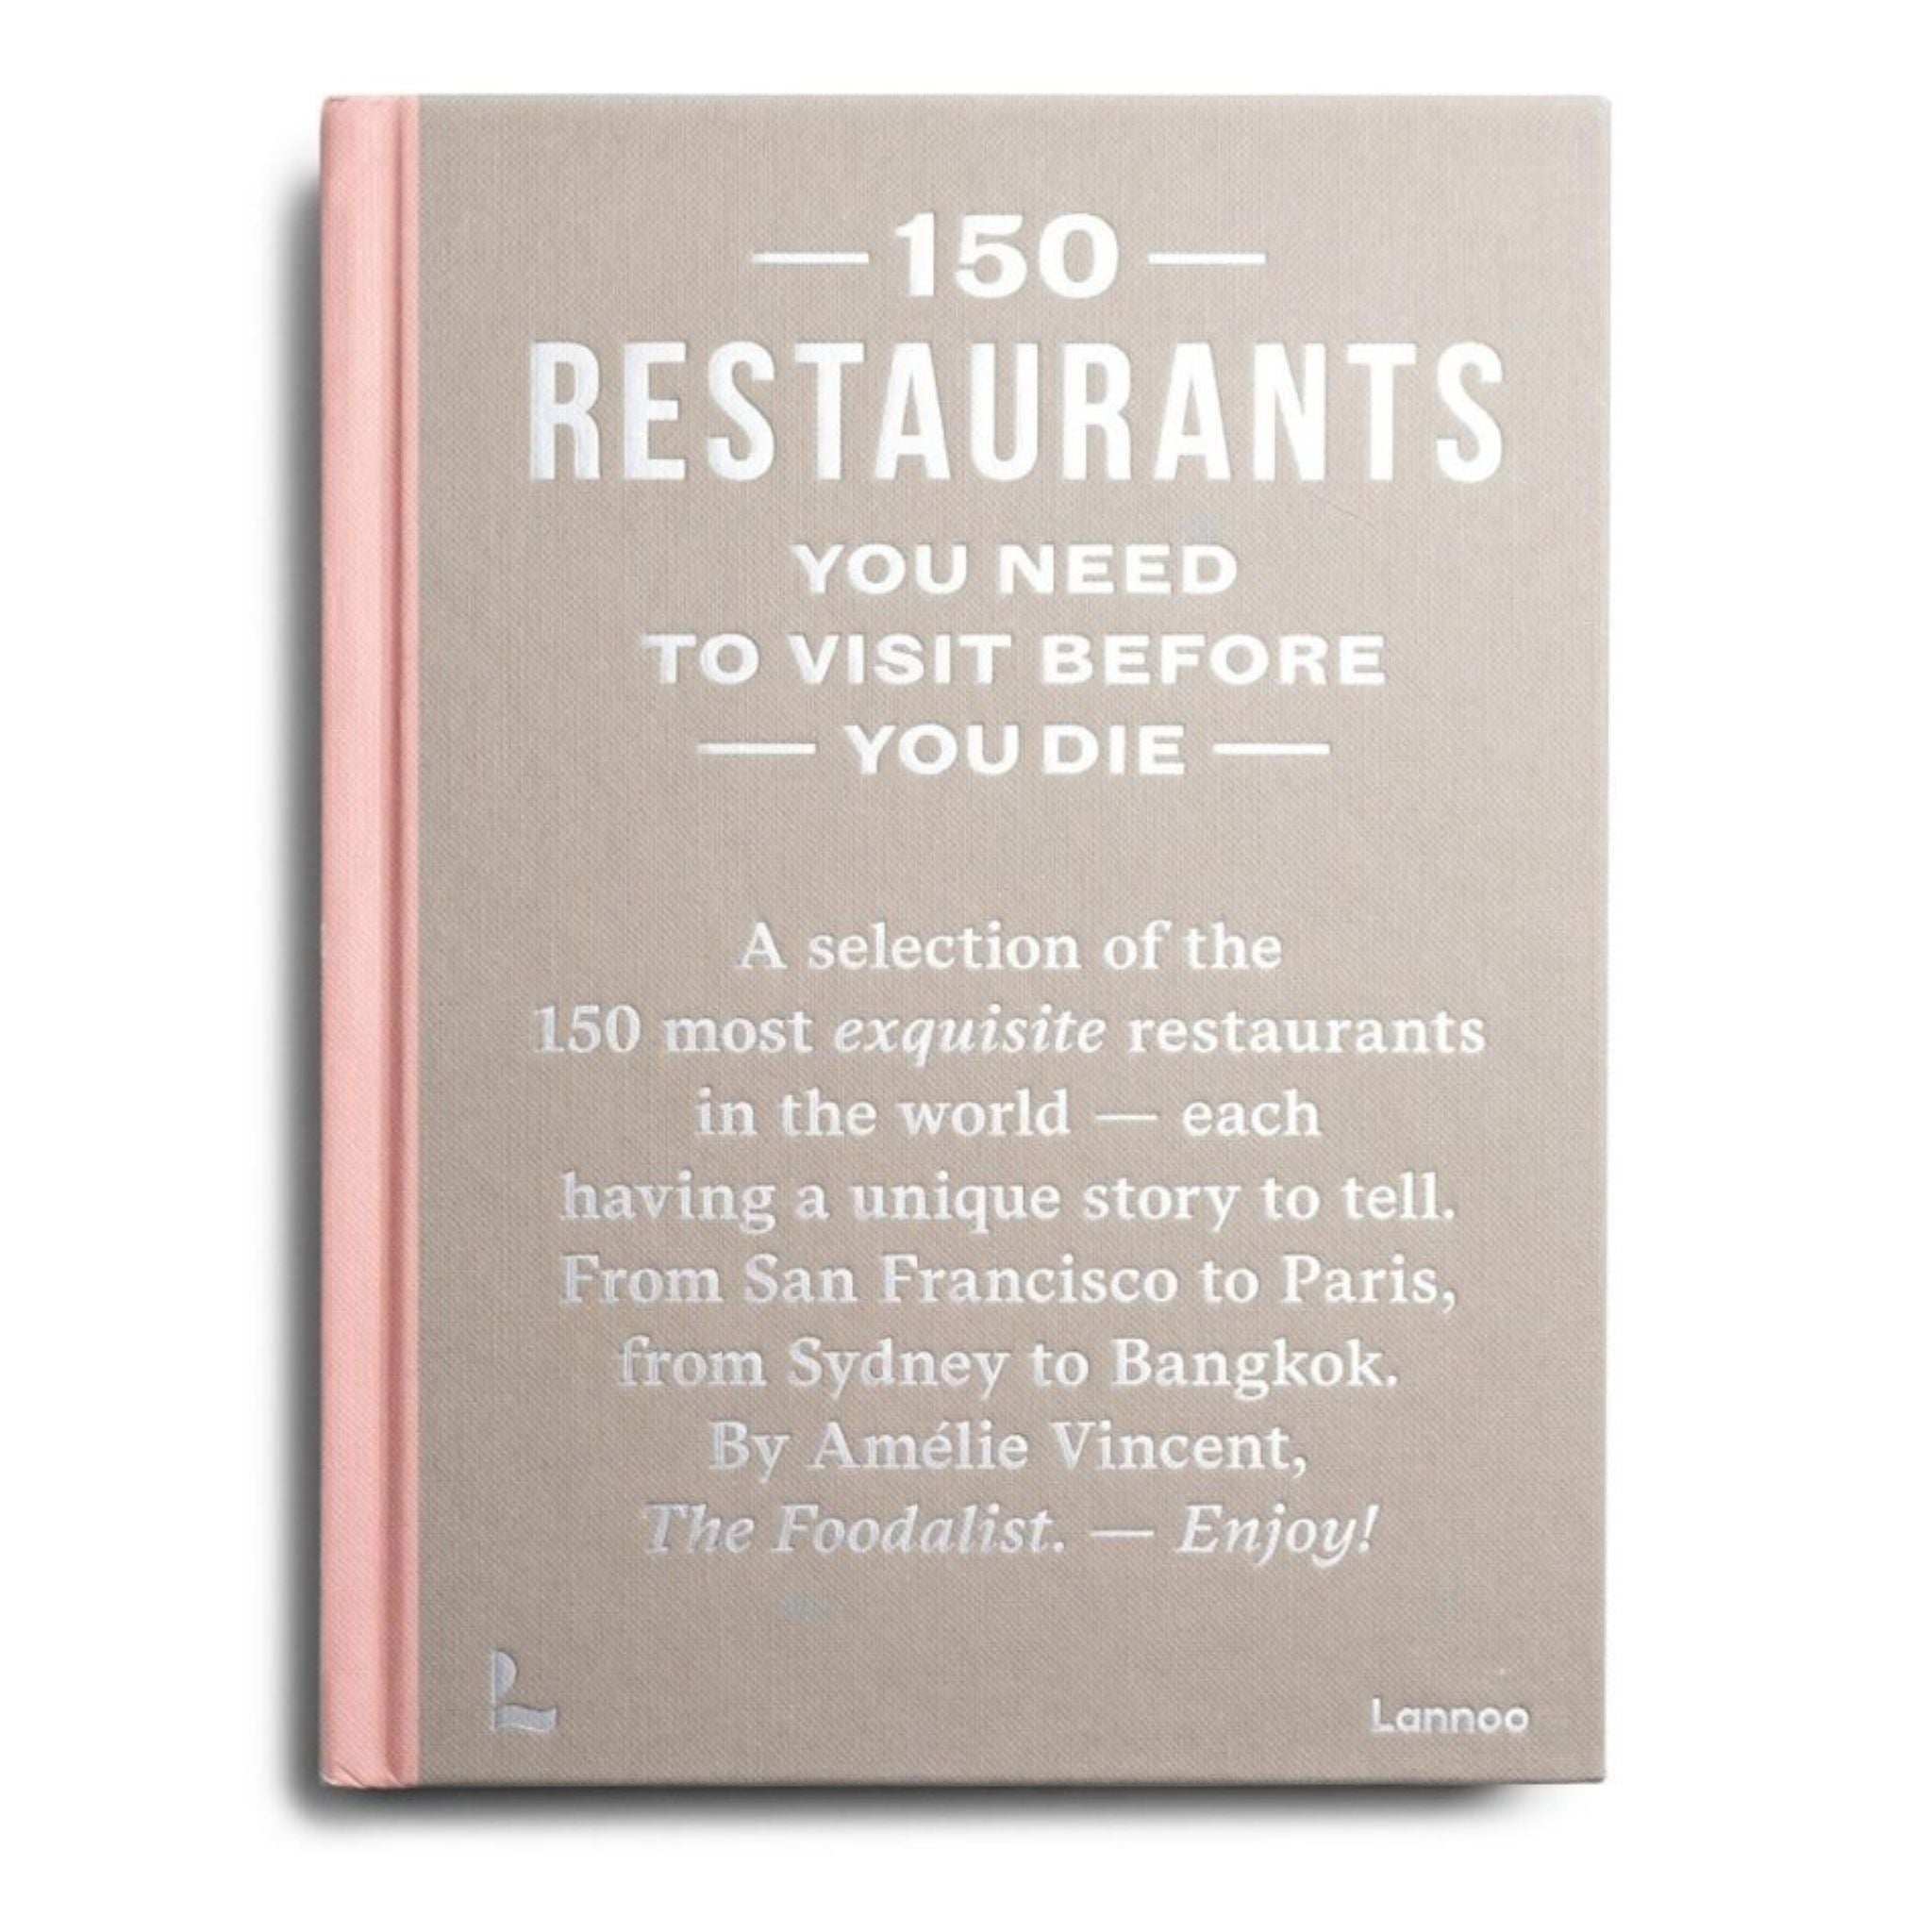 Book of 150 Restaurants to visit in the world